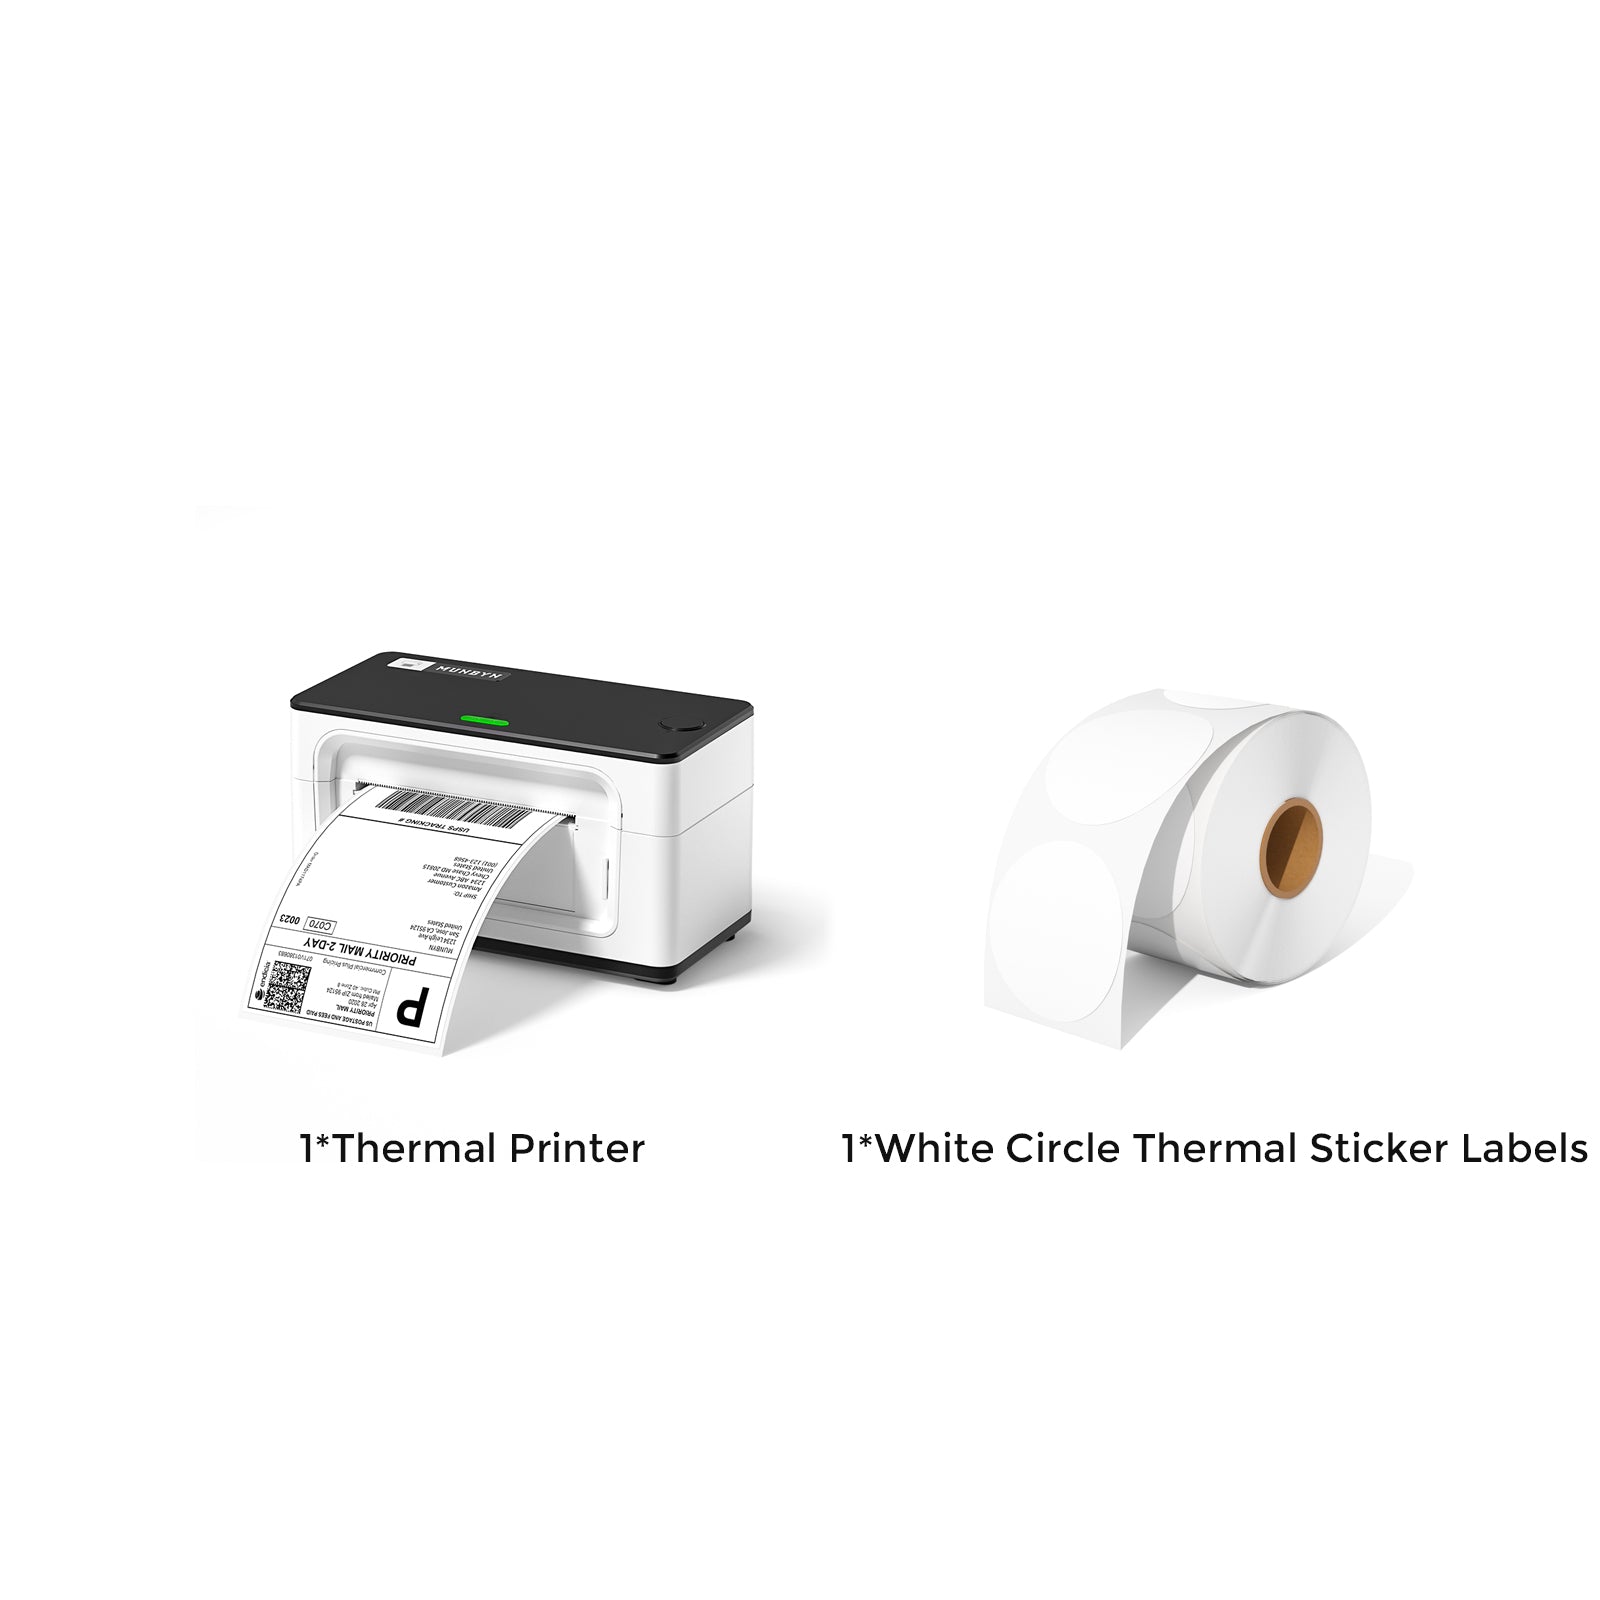 The MUNBYN P941 Pro 300DPI printer kit includes a thermal printer and a roll of 50mm circle labels, ideal for small business owners in Australia.